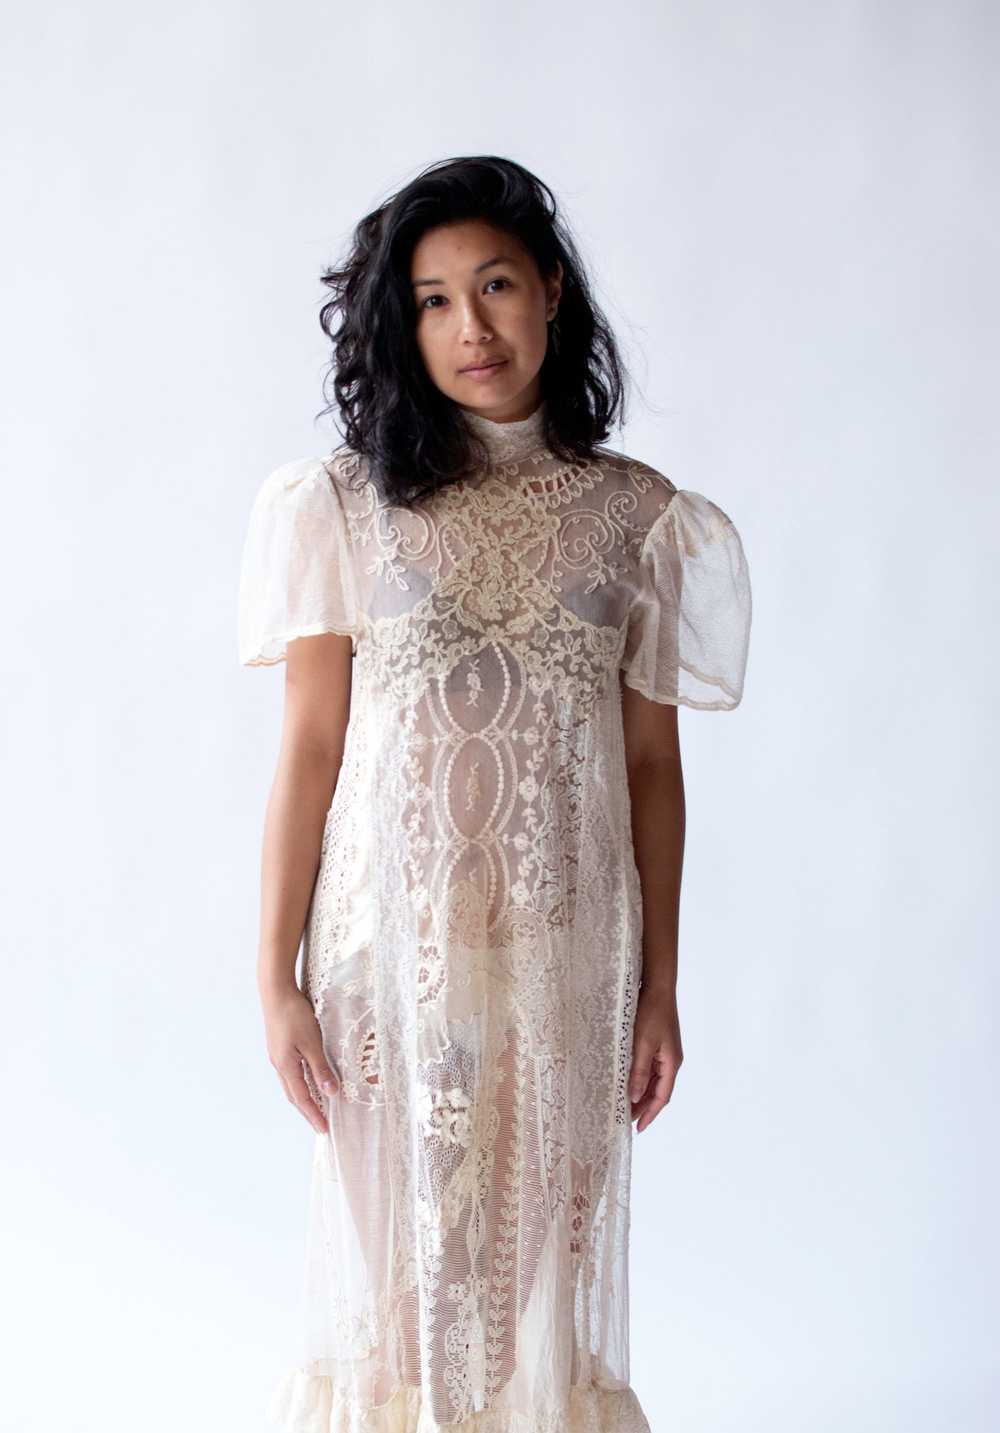 1980s Lace Works Dress - image 6